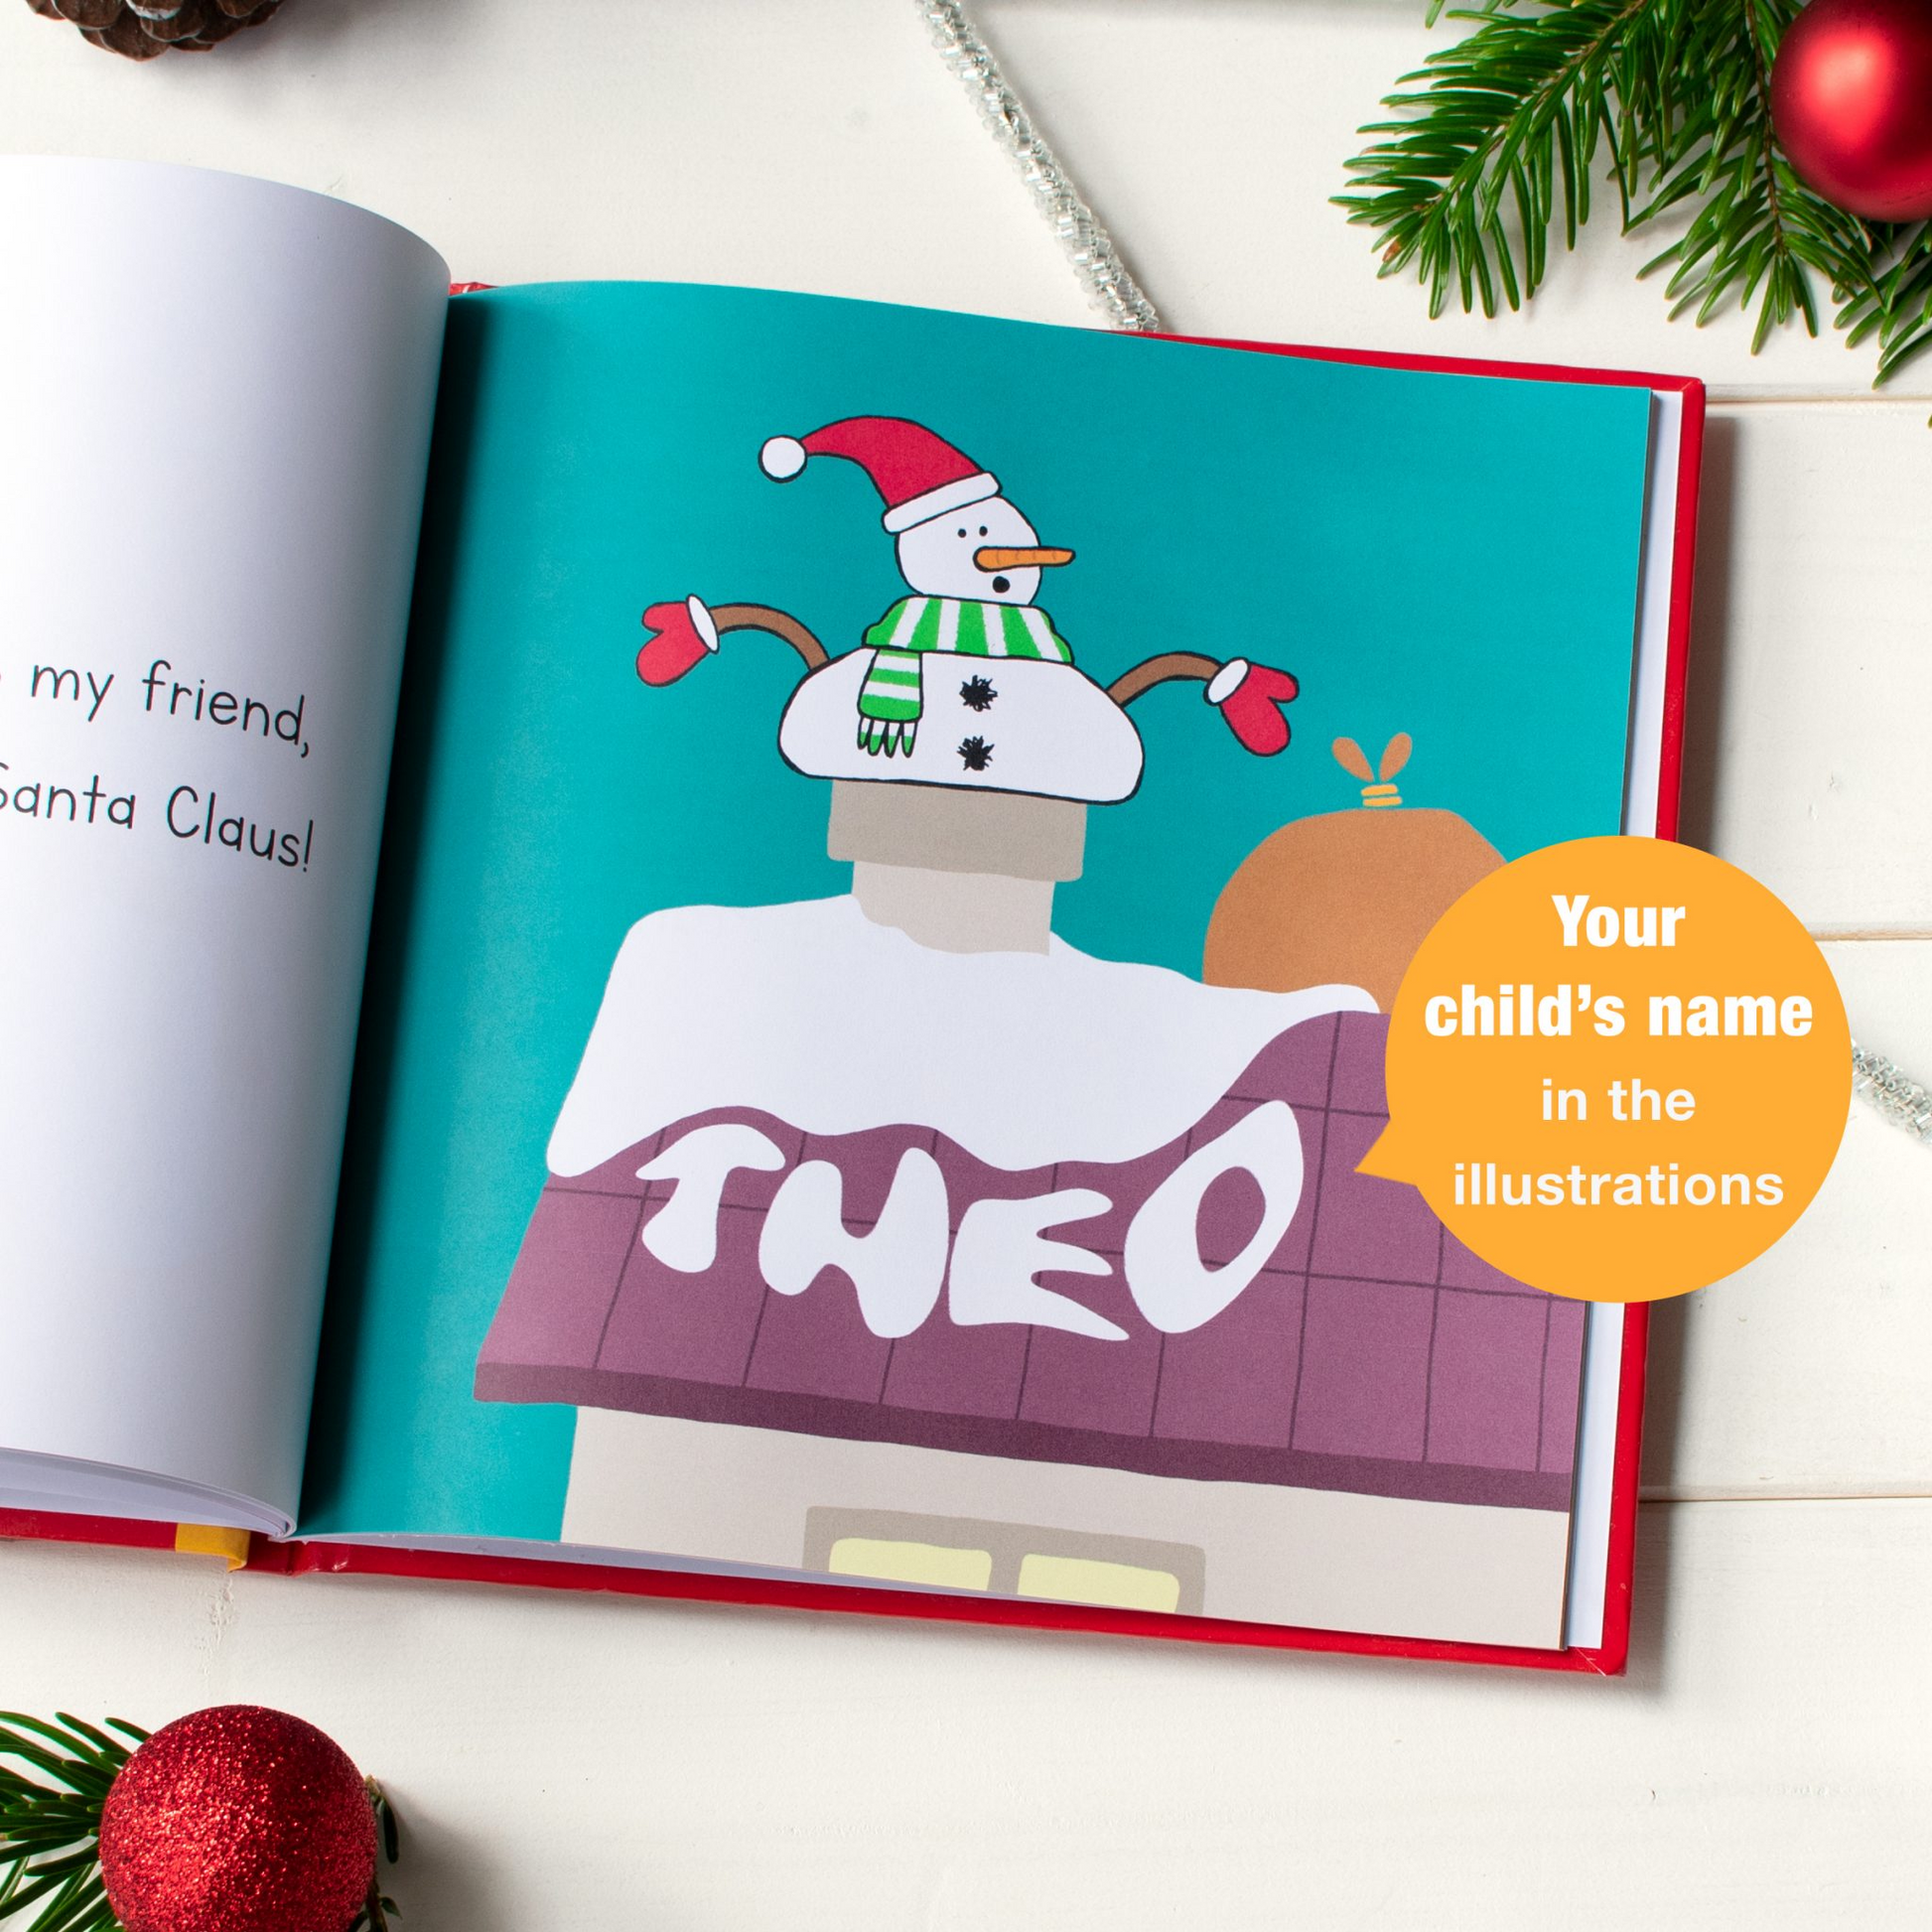 Personalised I’d Rather Be A Snowman Christmas Story Book